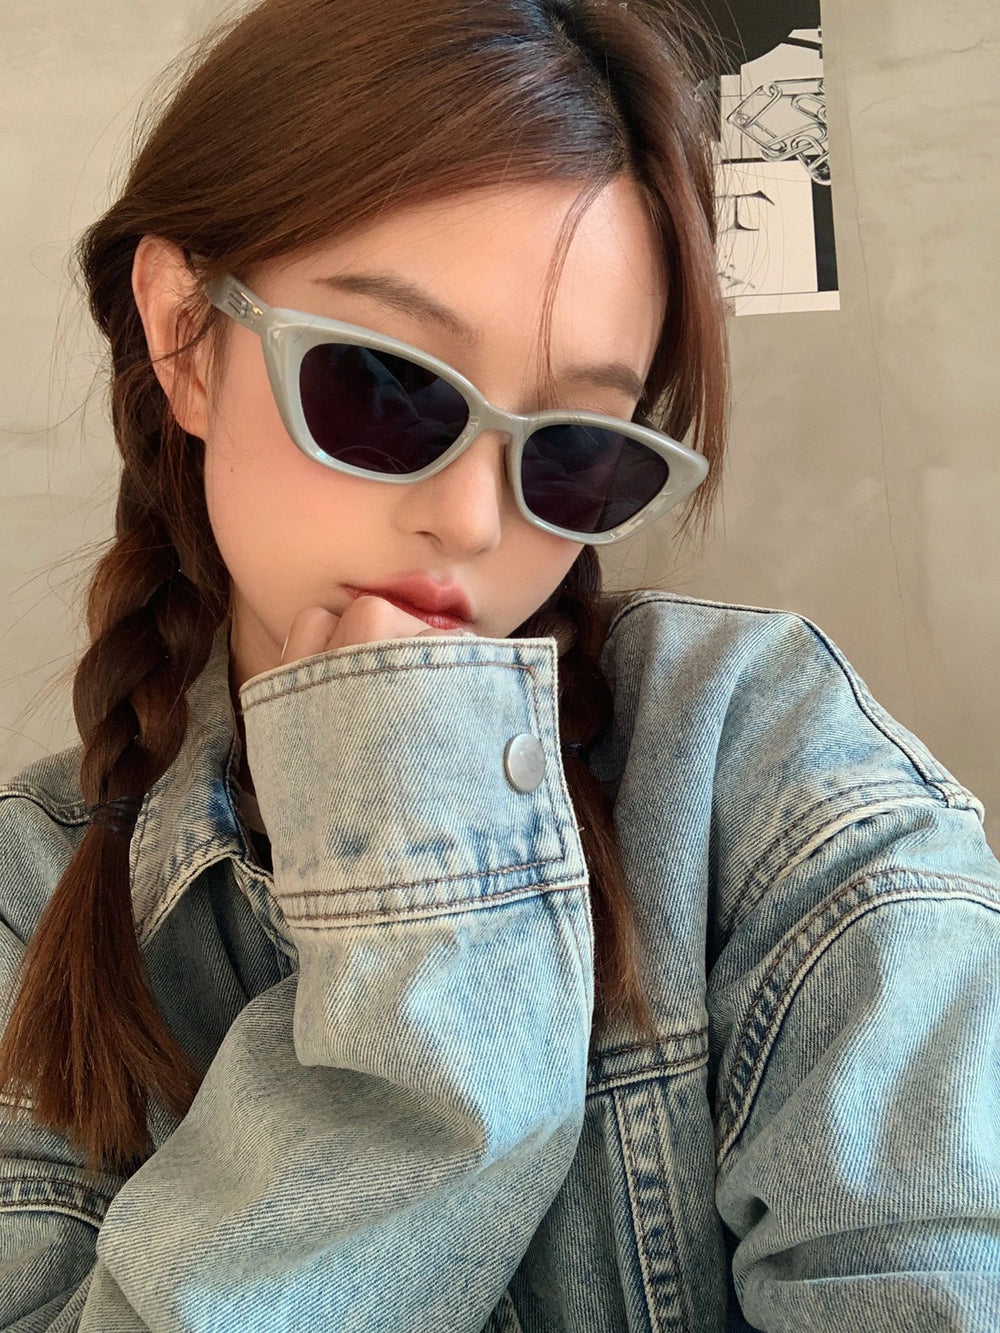 An effortlessly cool woman dons sunglasses and a denim jacket, epitomizing casual yet fashionable style.